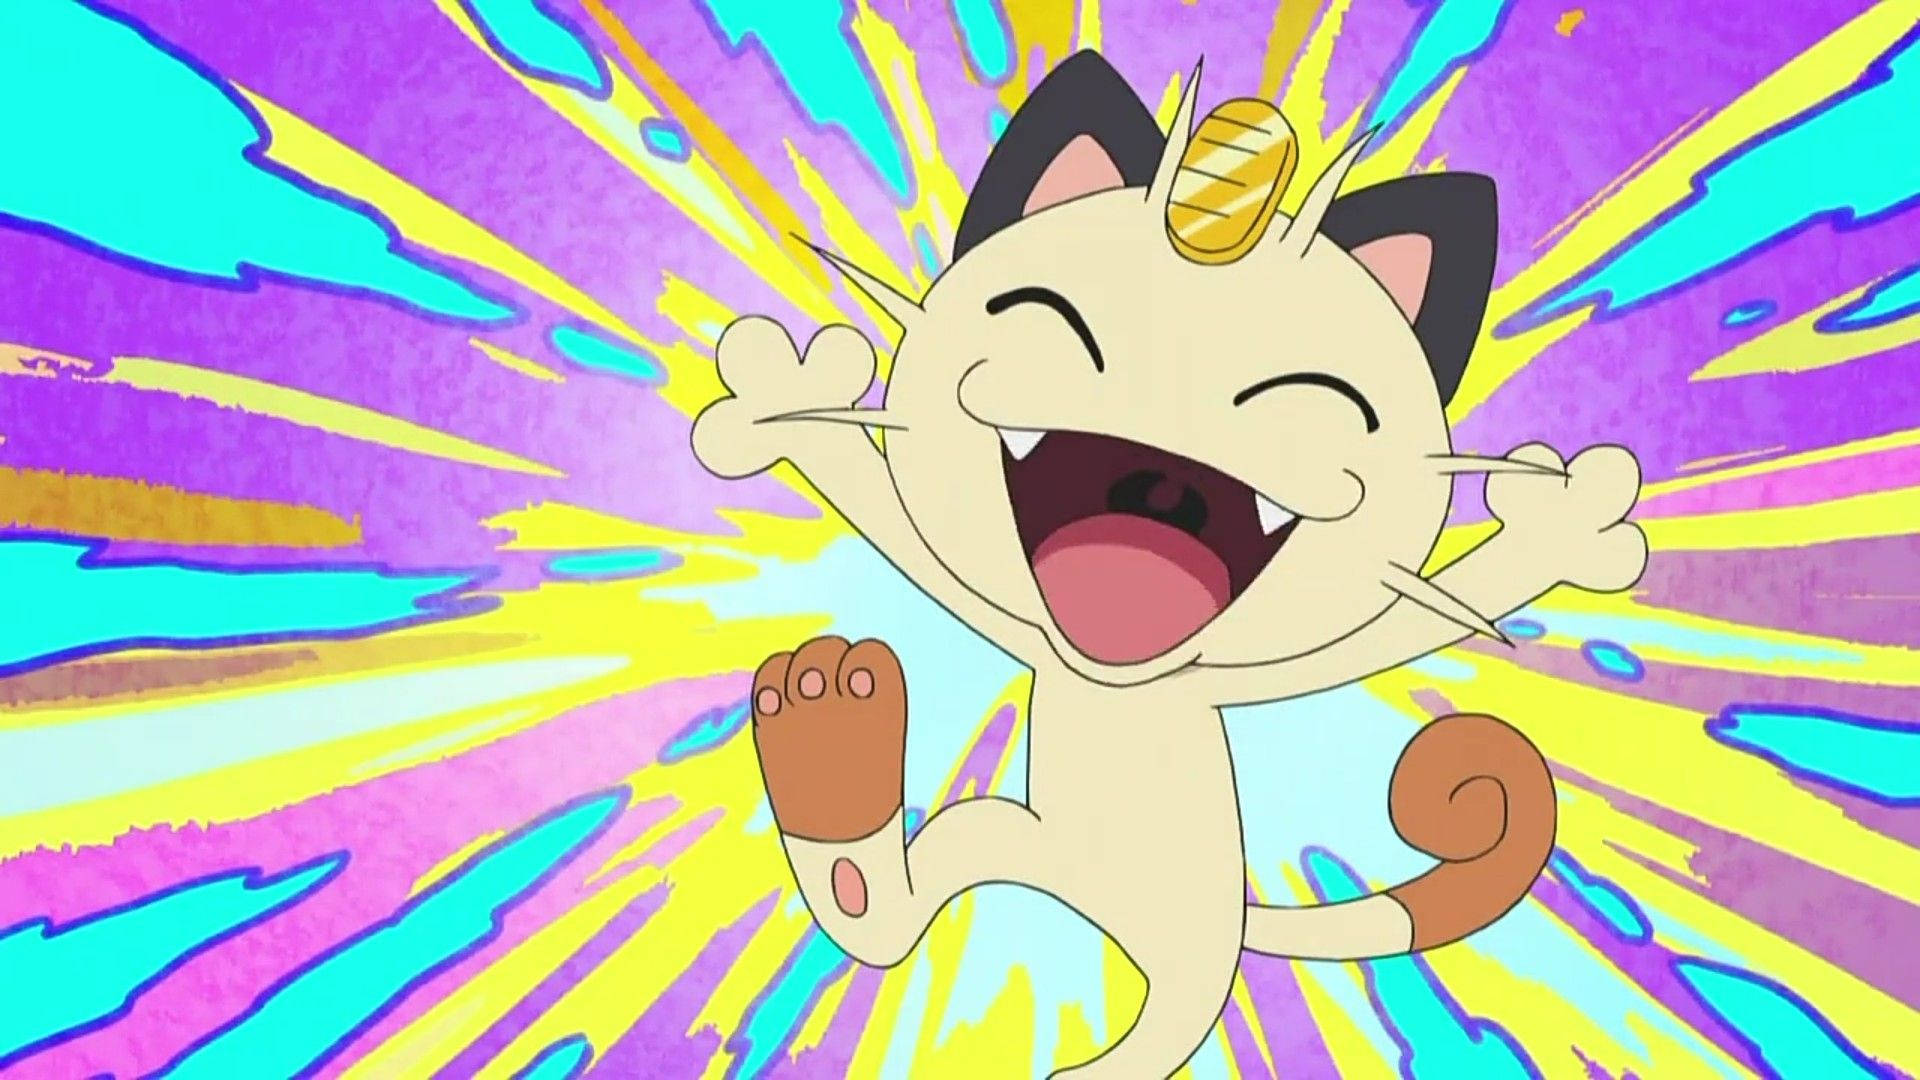 Meowth Looking Happy With Colorful Backdrop Wallpaper